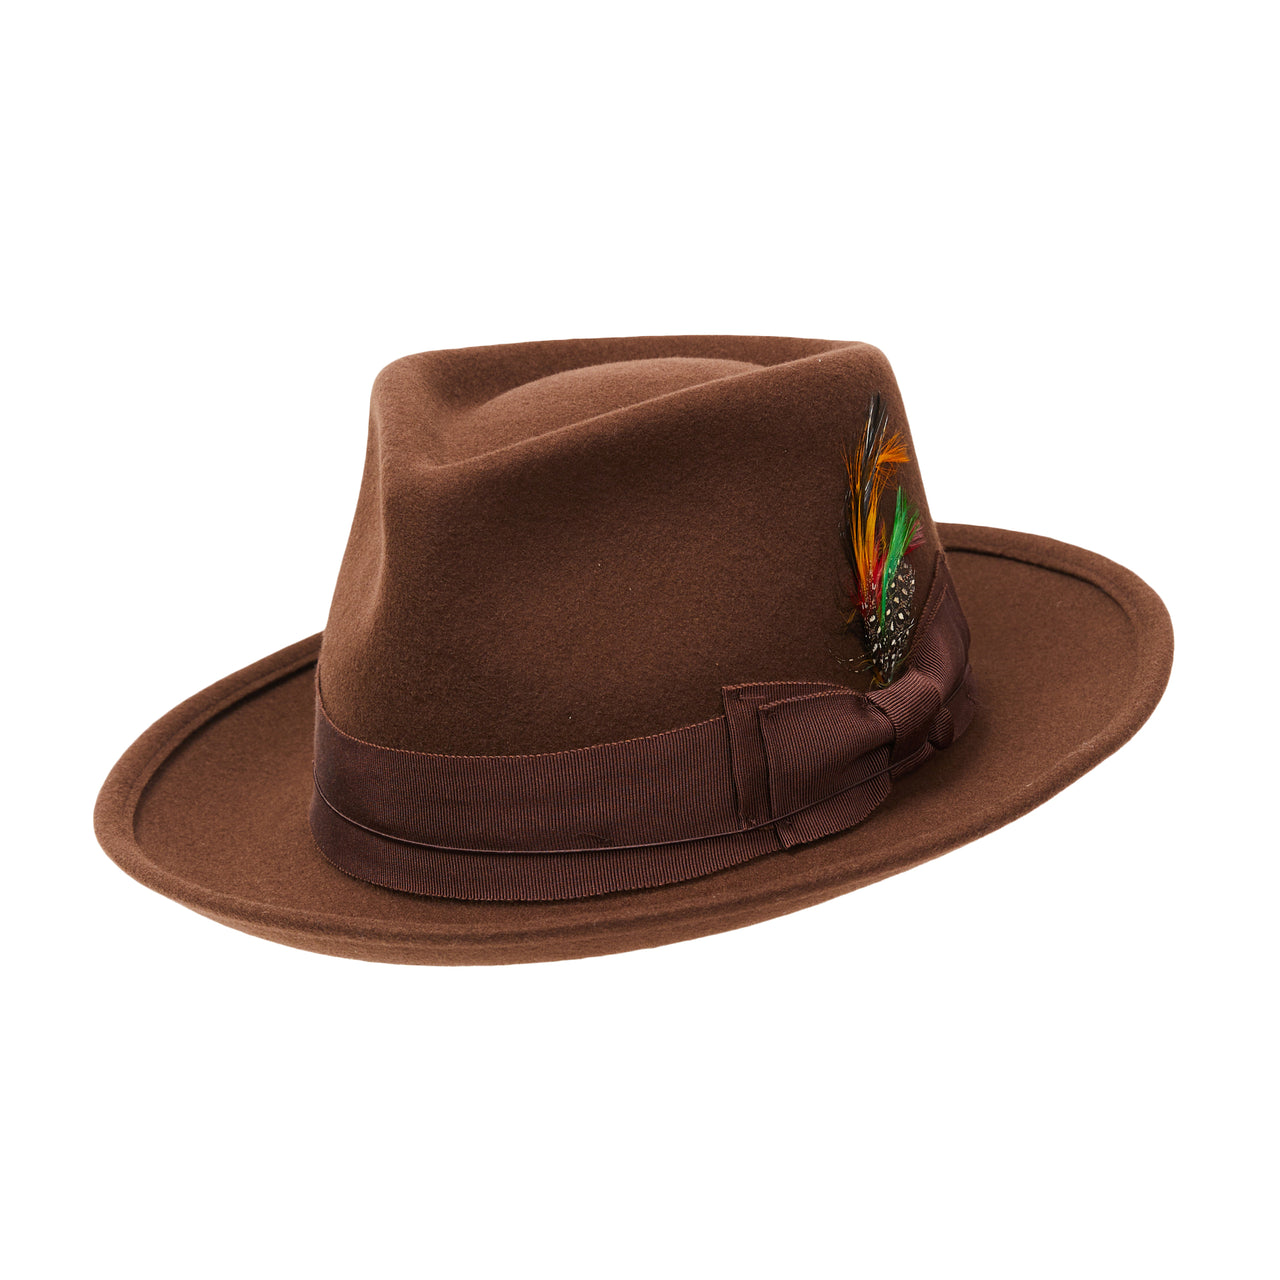 CITY HATTERS Theo Squatter Fedora